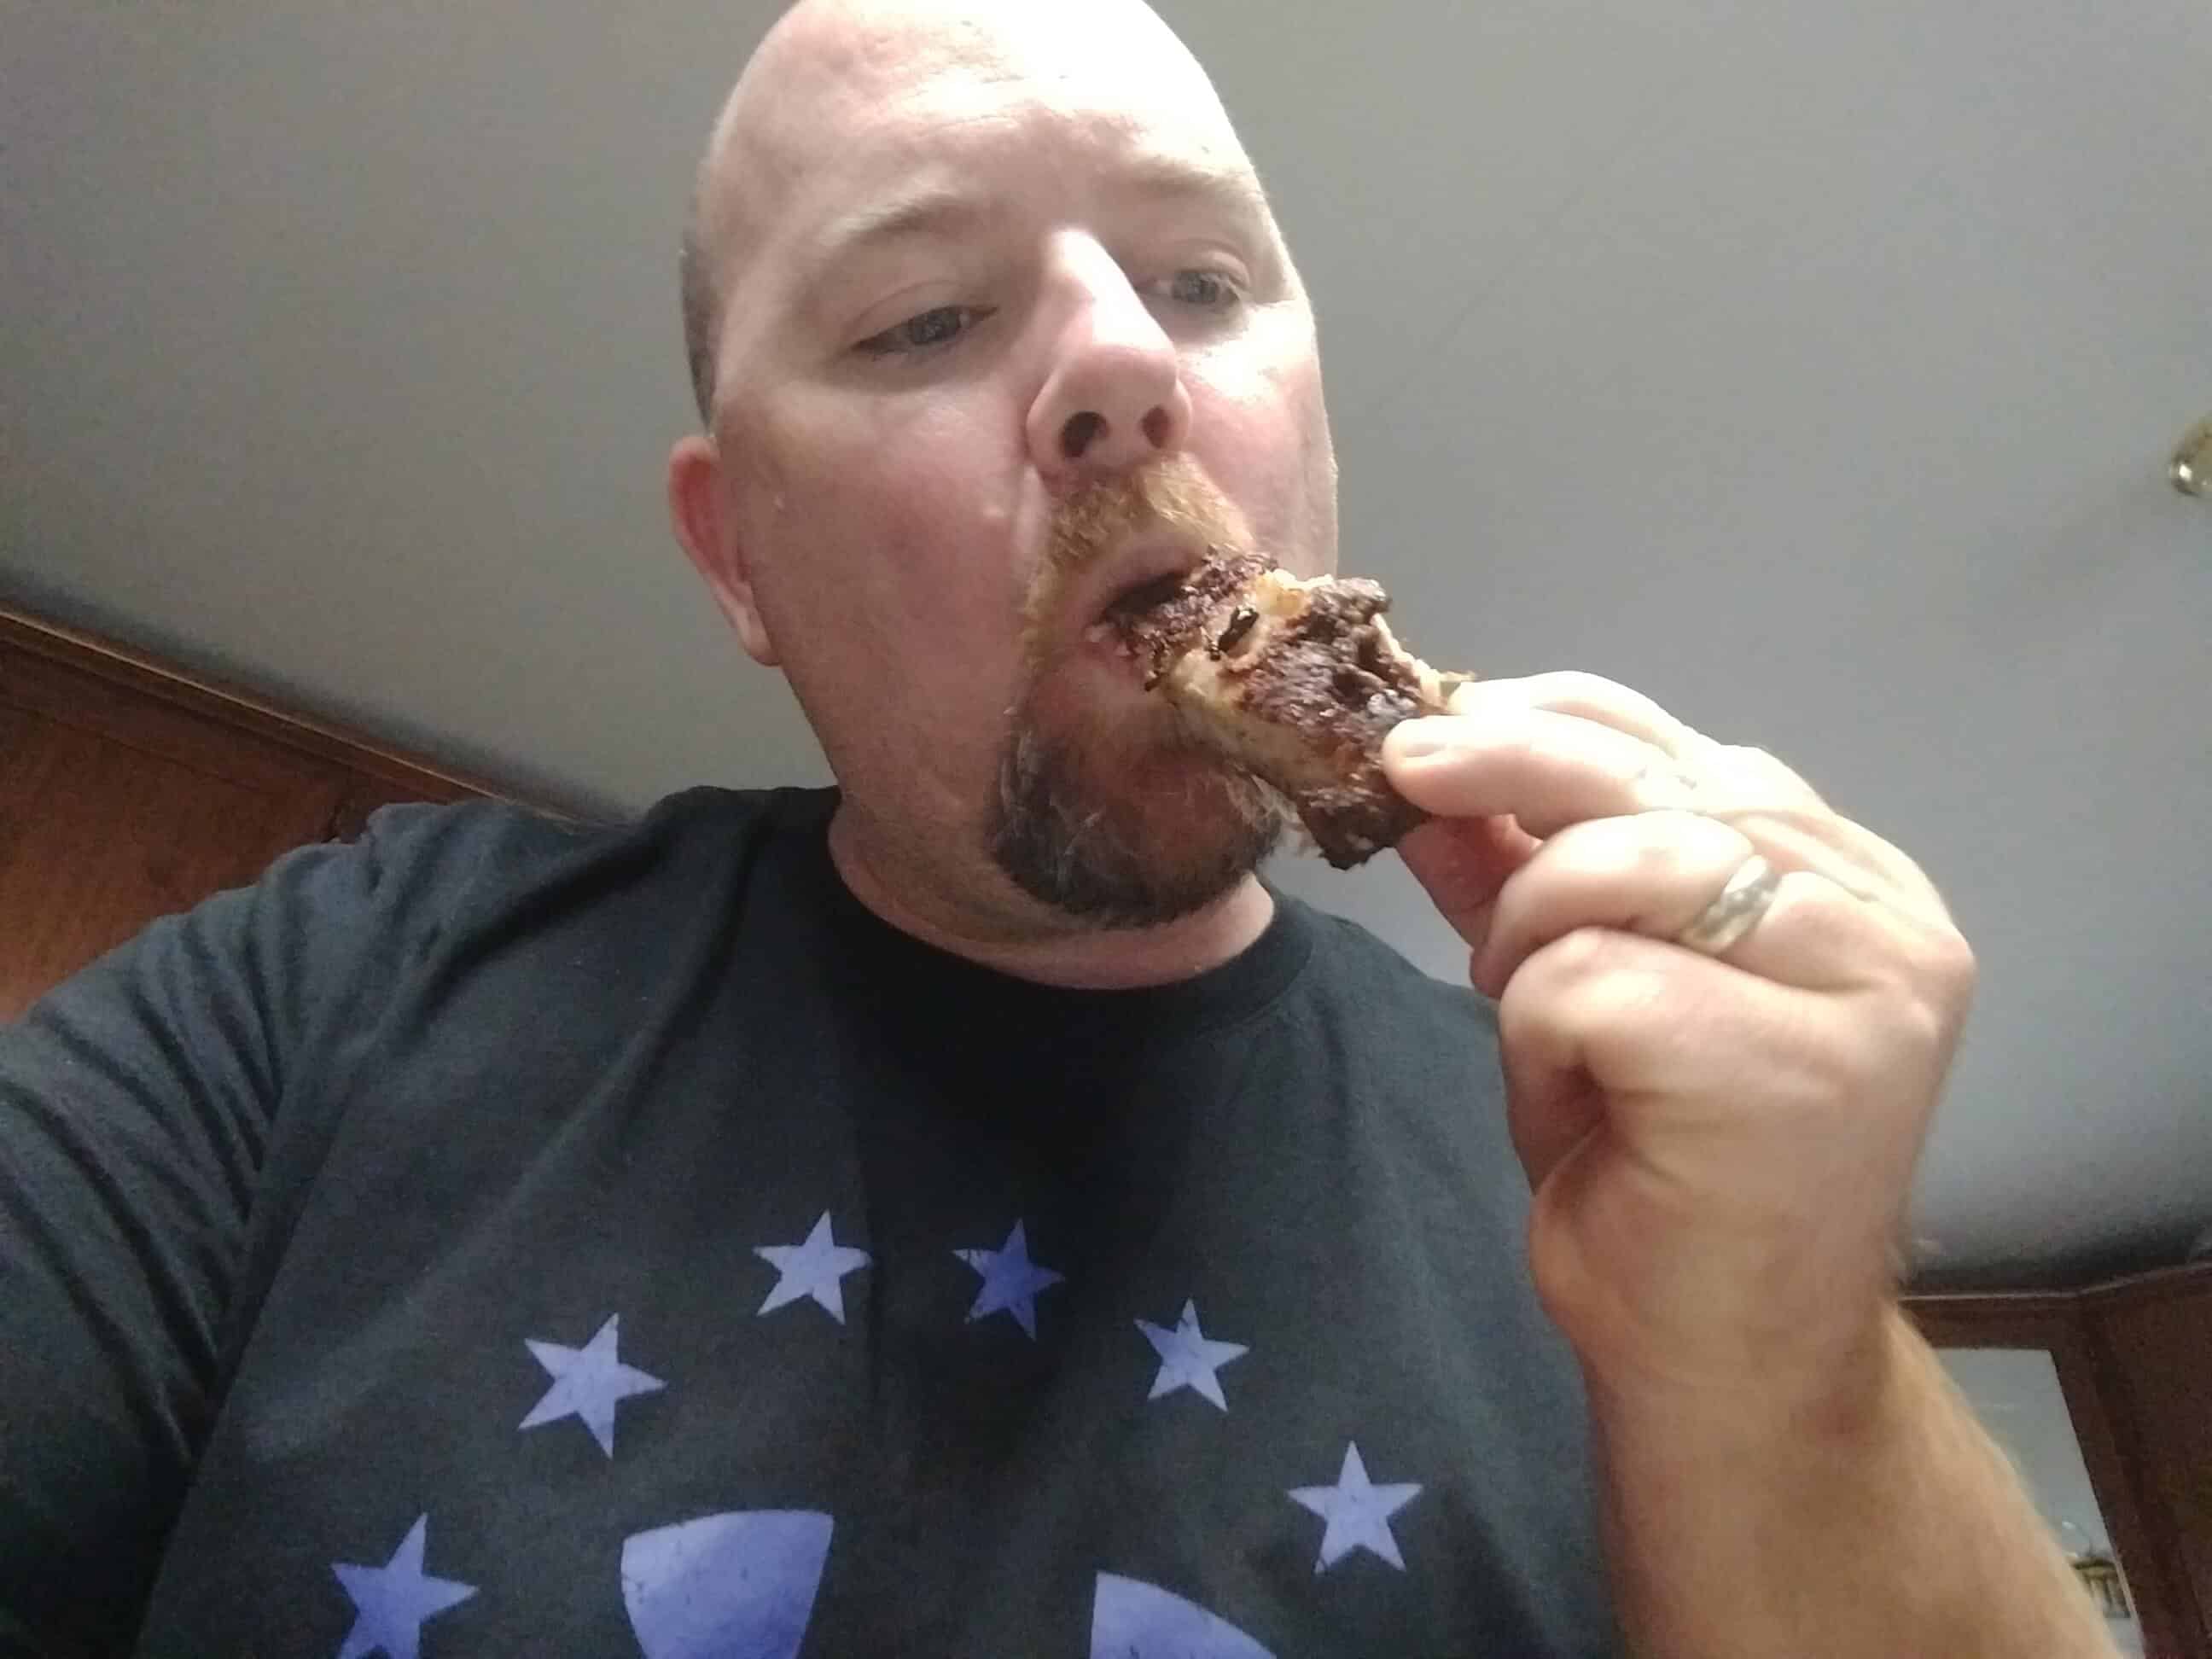 Me eating ribs that was cooked on the orion cooker. 